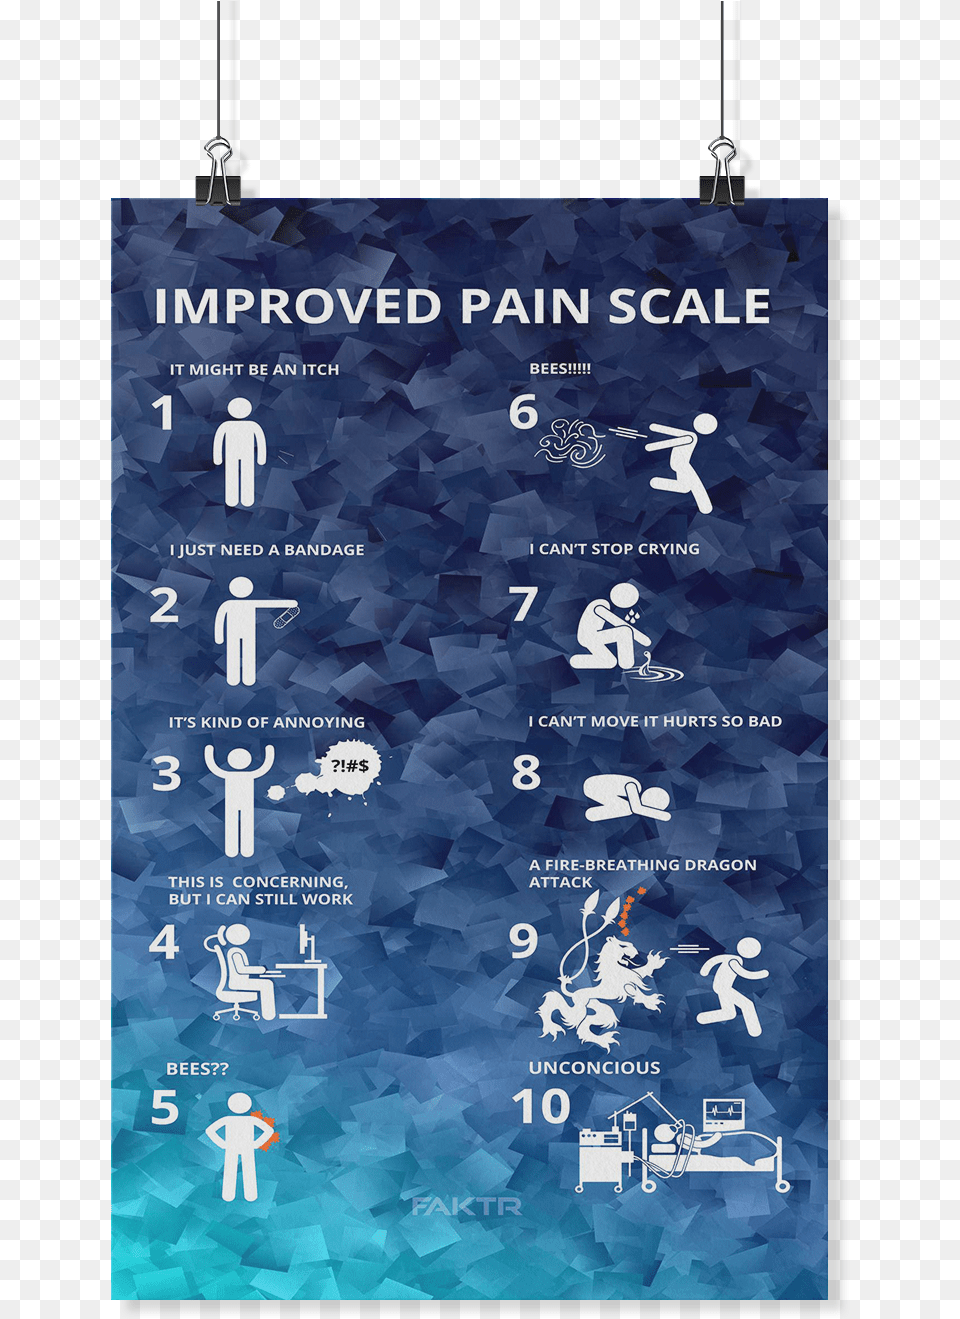 Improved Pain Scale Poster, Advertisement, Text Png Image